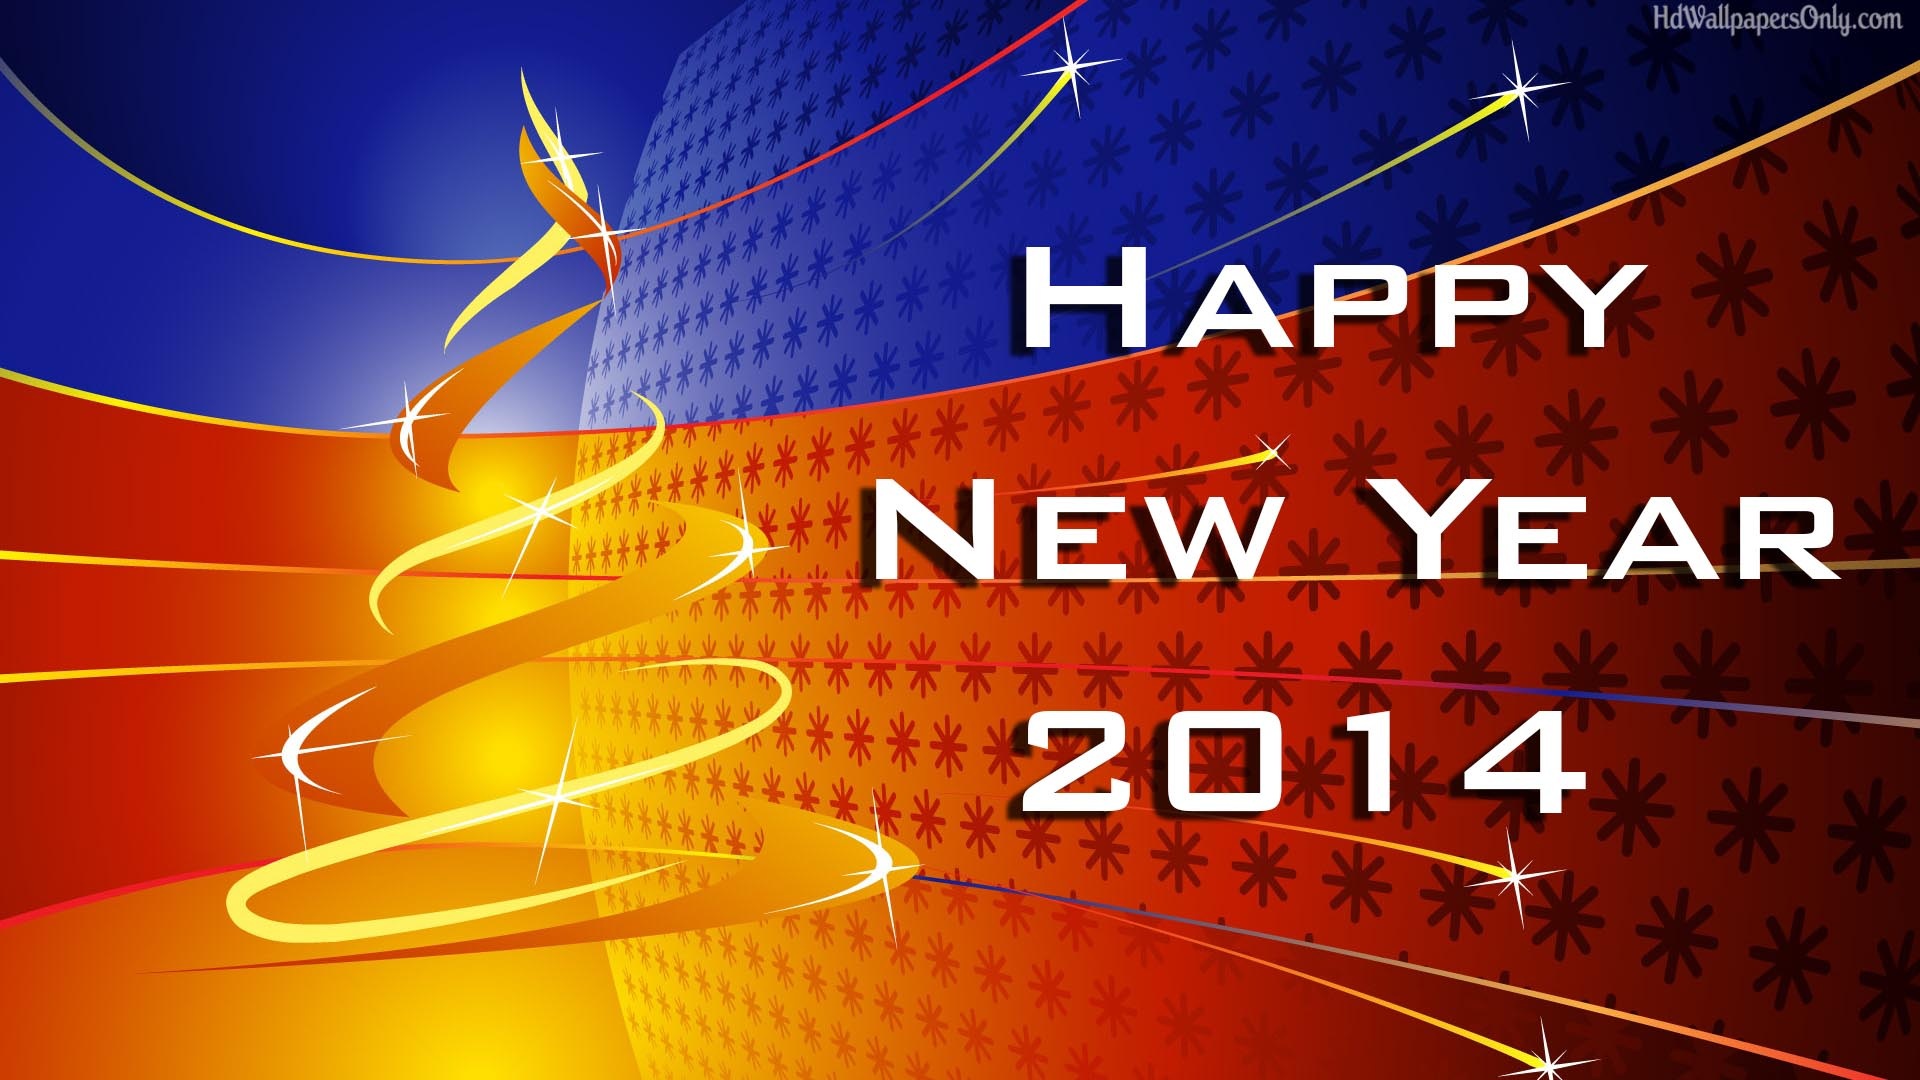 2014 New Year Theme HD Wallpapers (1) #14 - 1920x1080